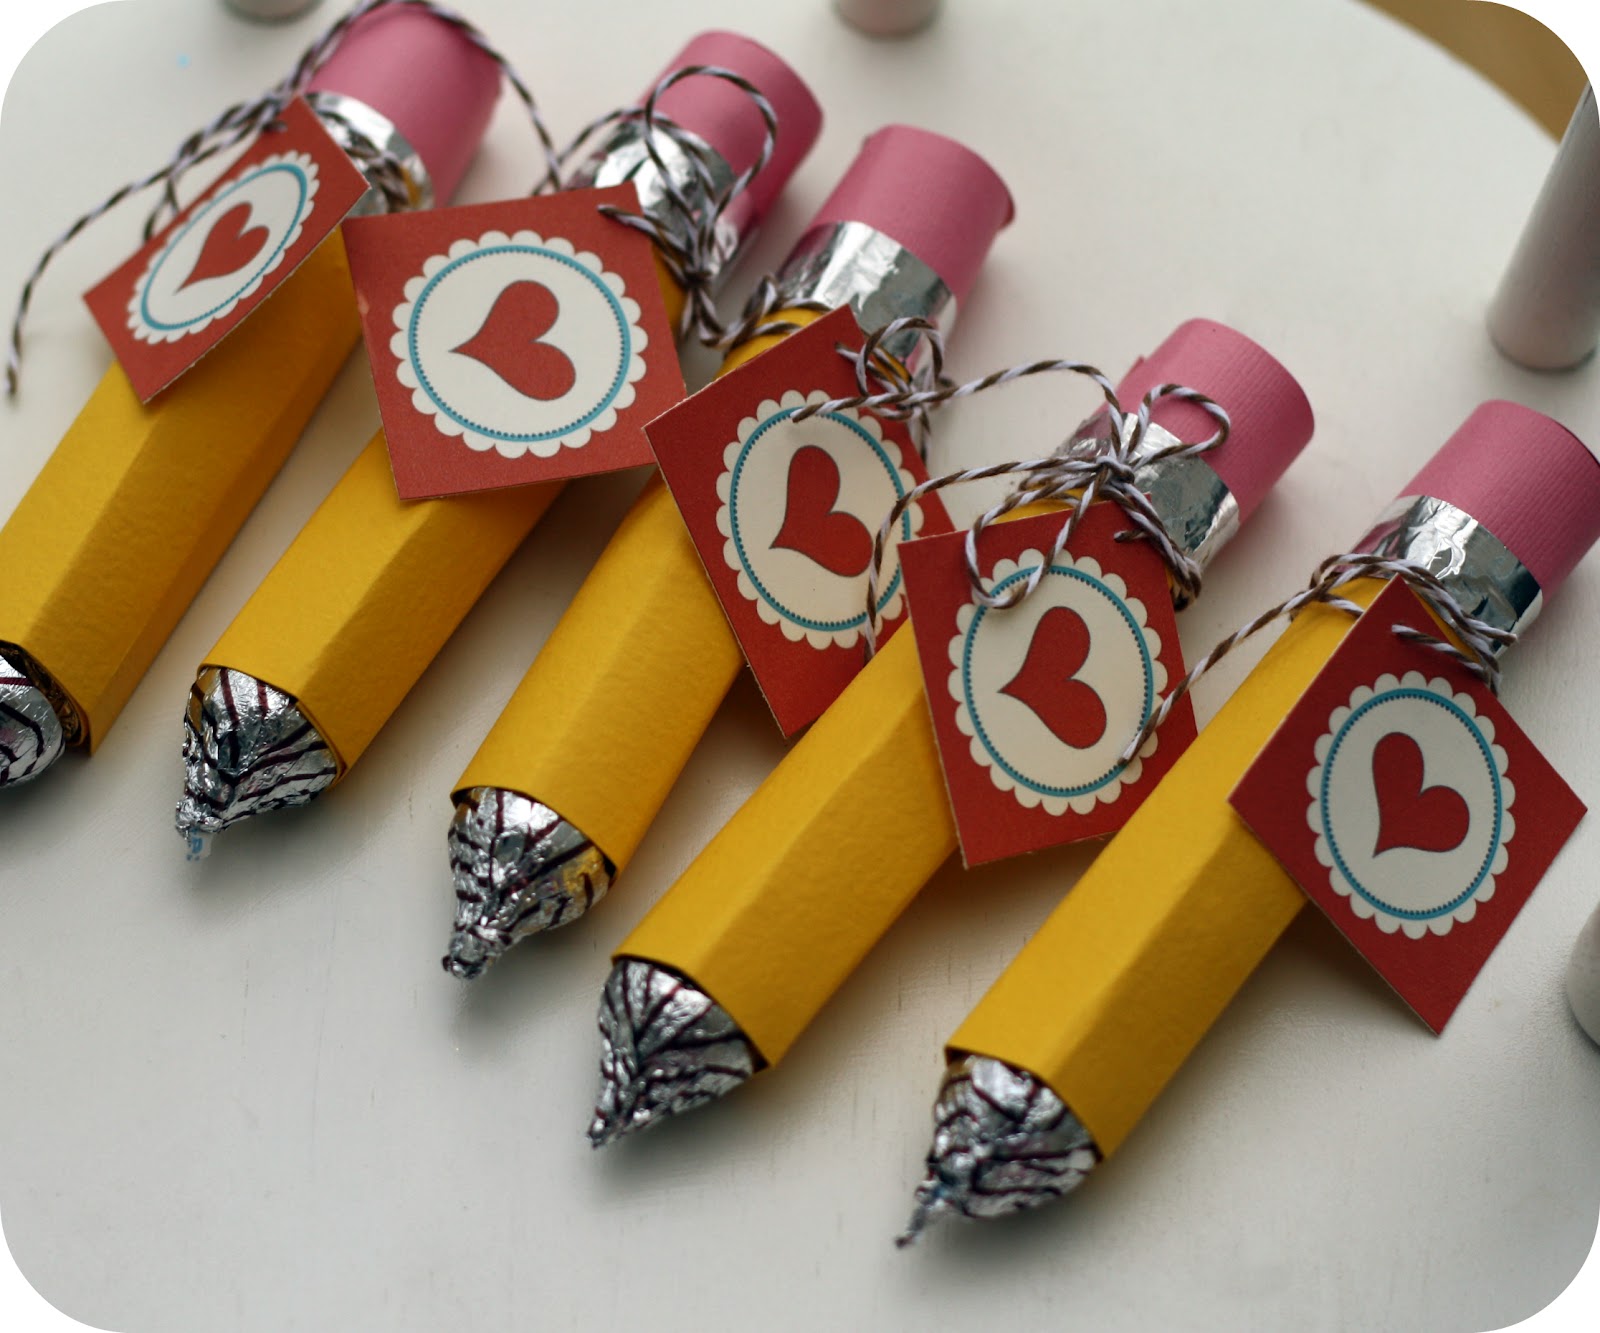 Keeping My Cents ¢¢¢: Rolo Pencil Valentines